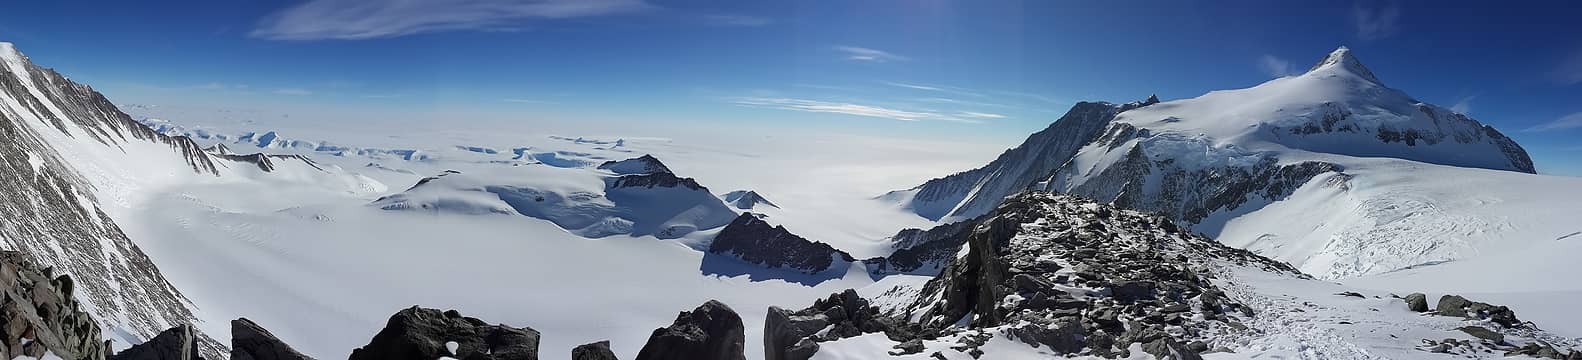 Pano shot from summit towards Mt. Shinn. Photo by Ossy.